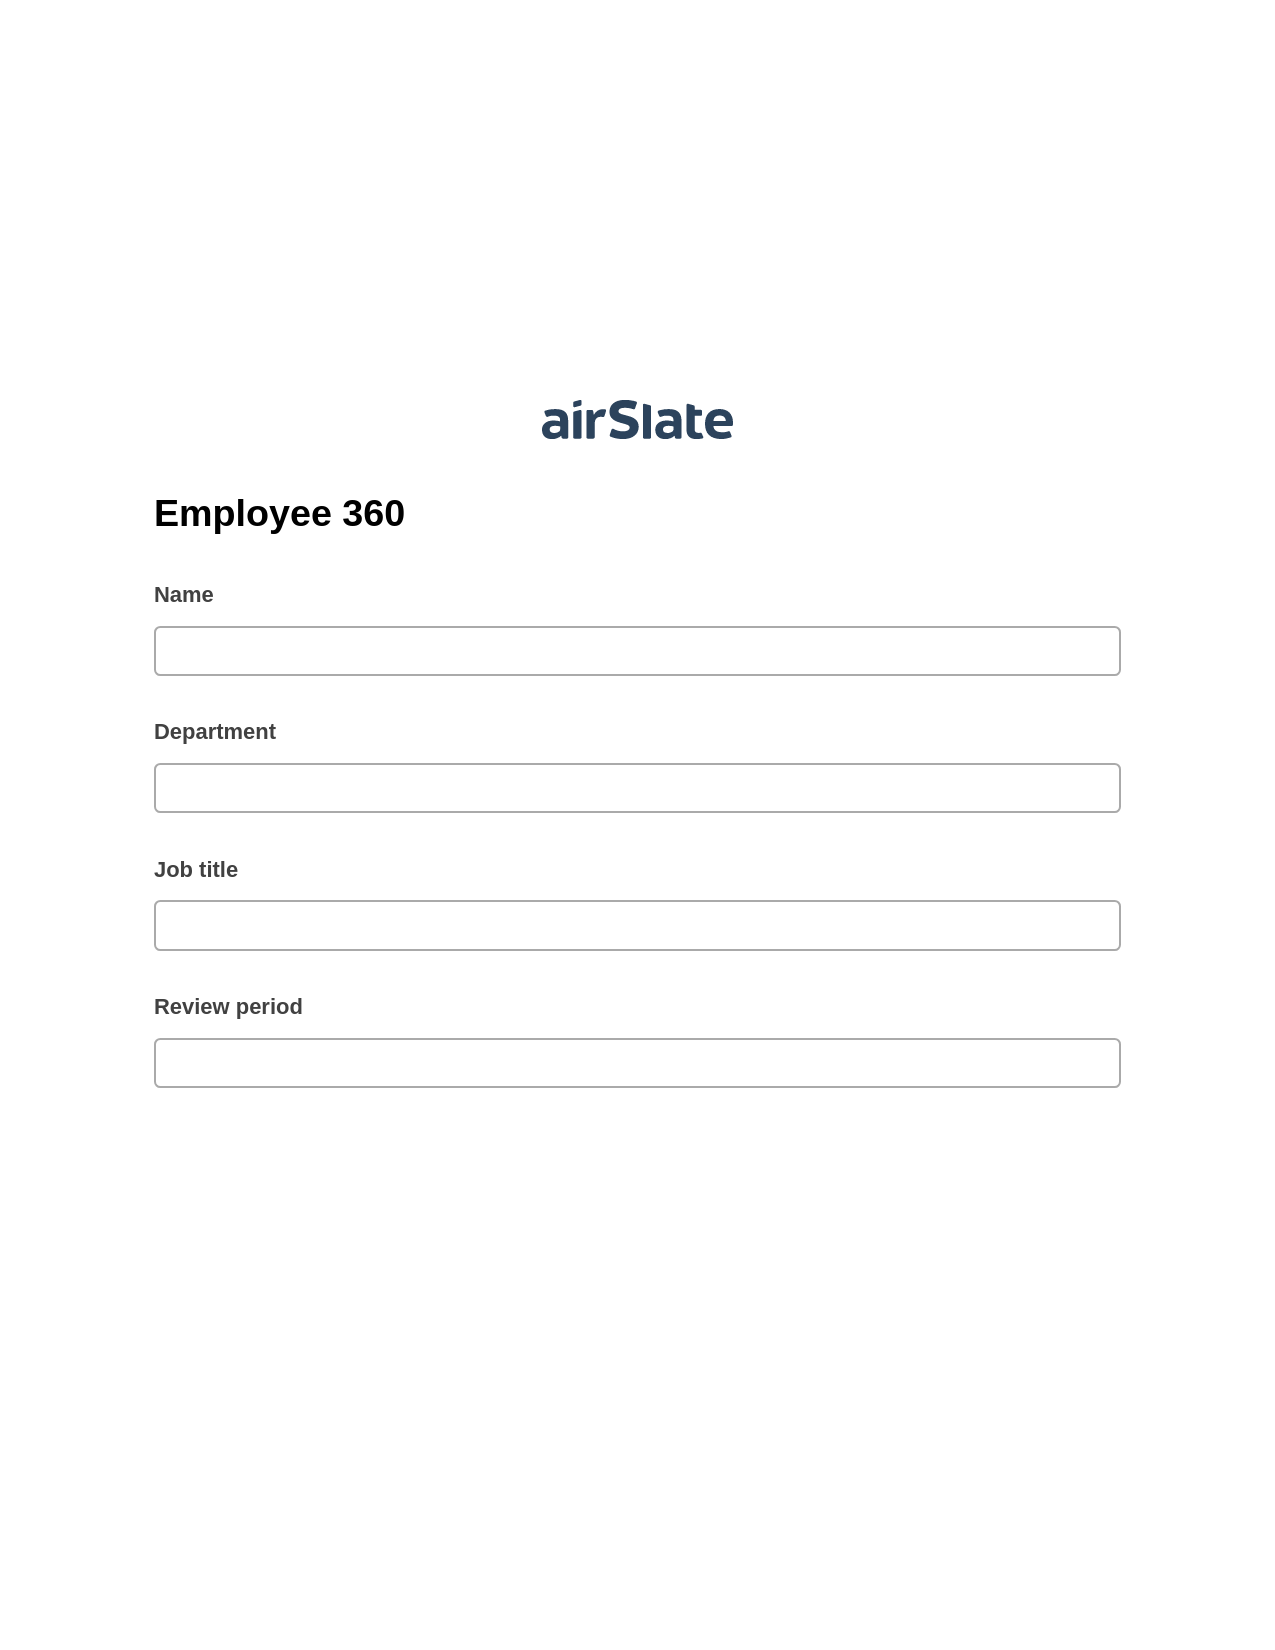 Employee 360 Pre-fill from MS Dynamics 365 Records, Update MS Dynamics 365 Record Bot, Archive to Box Bot